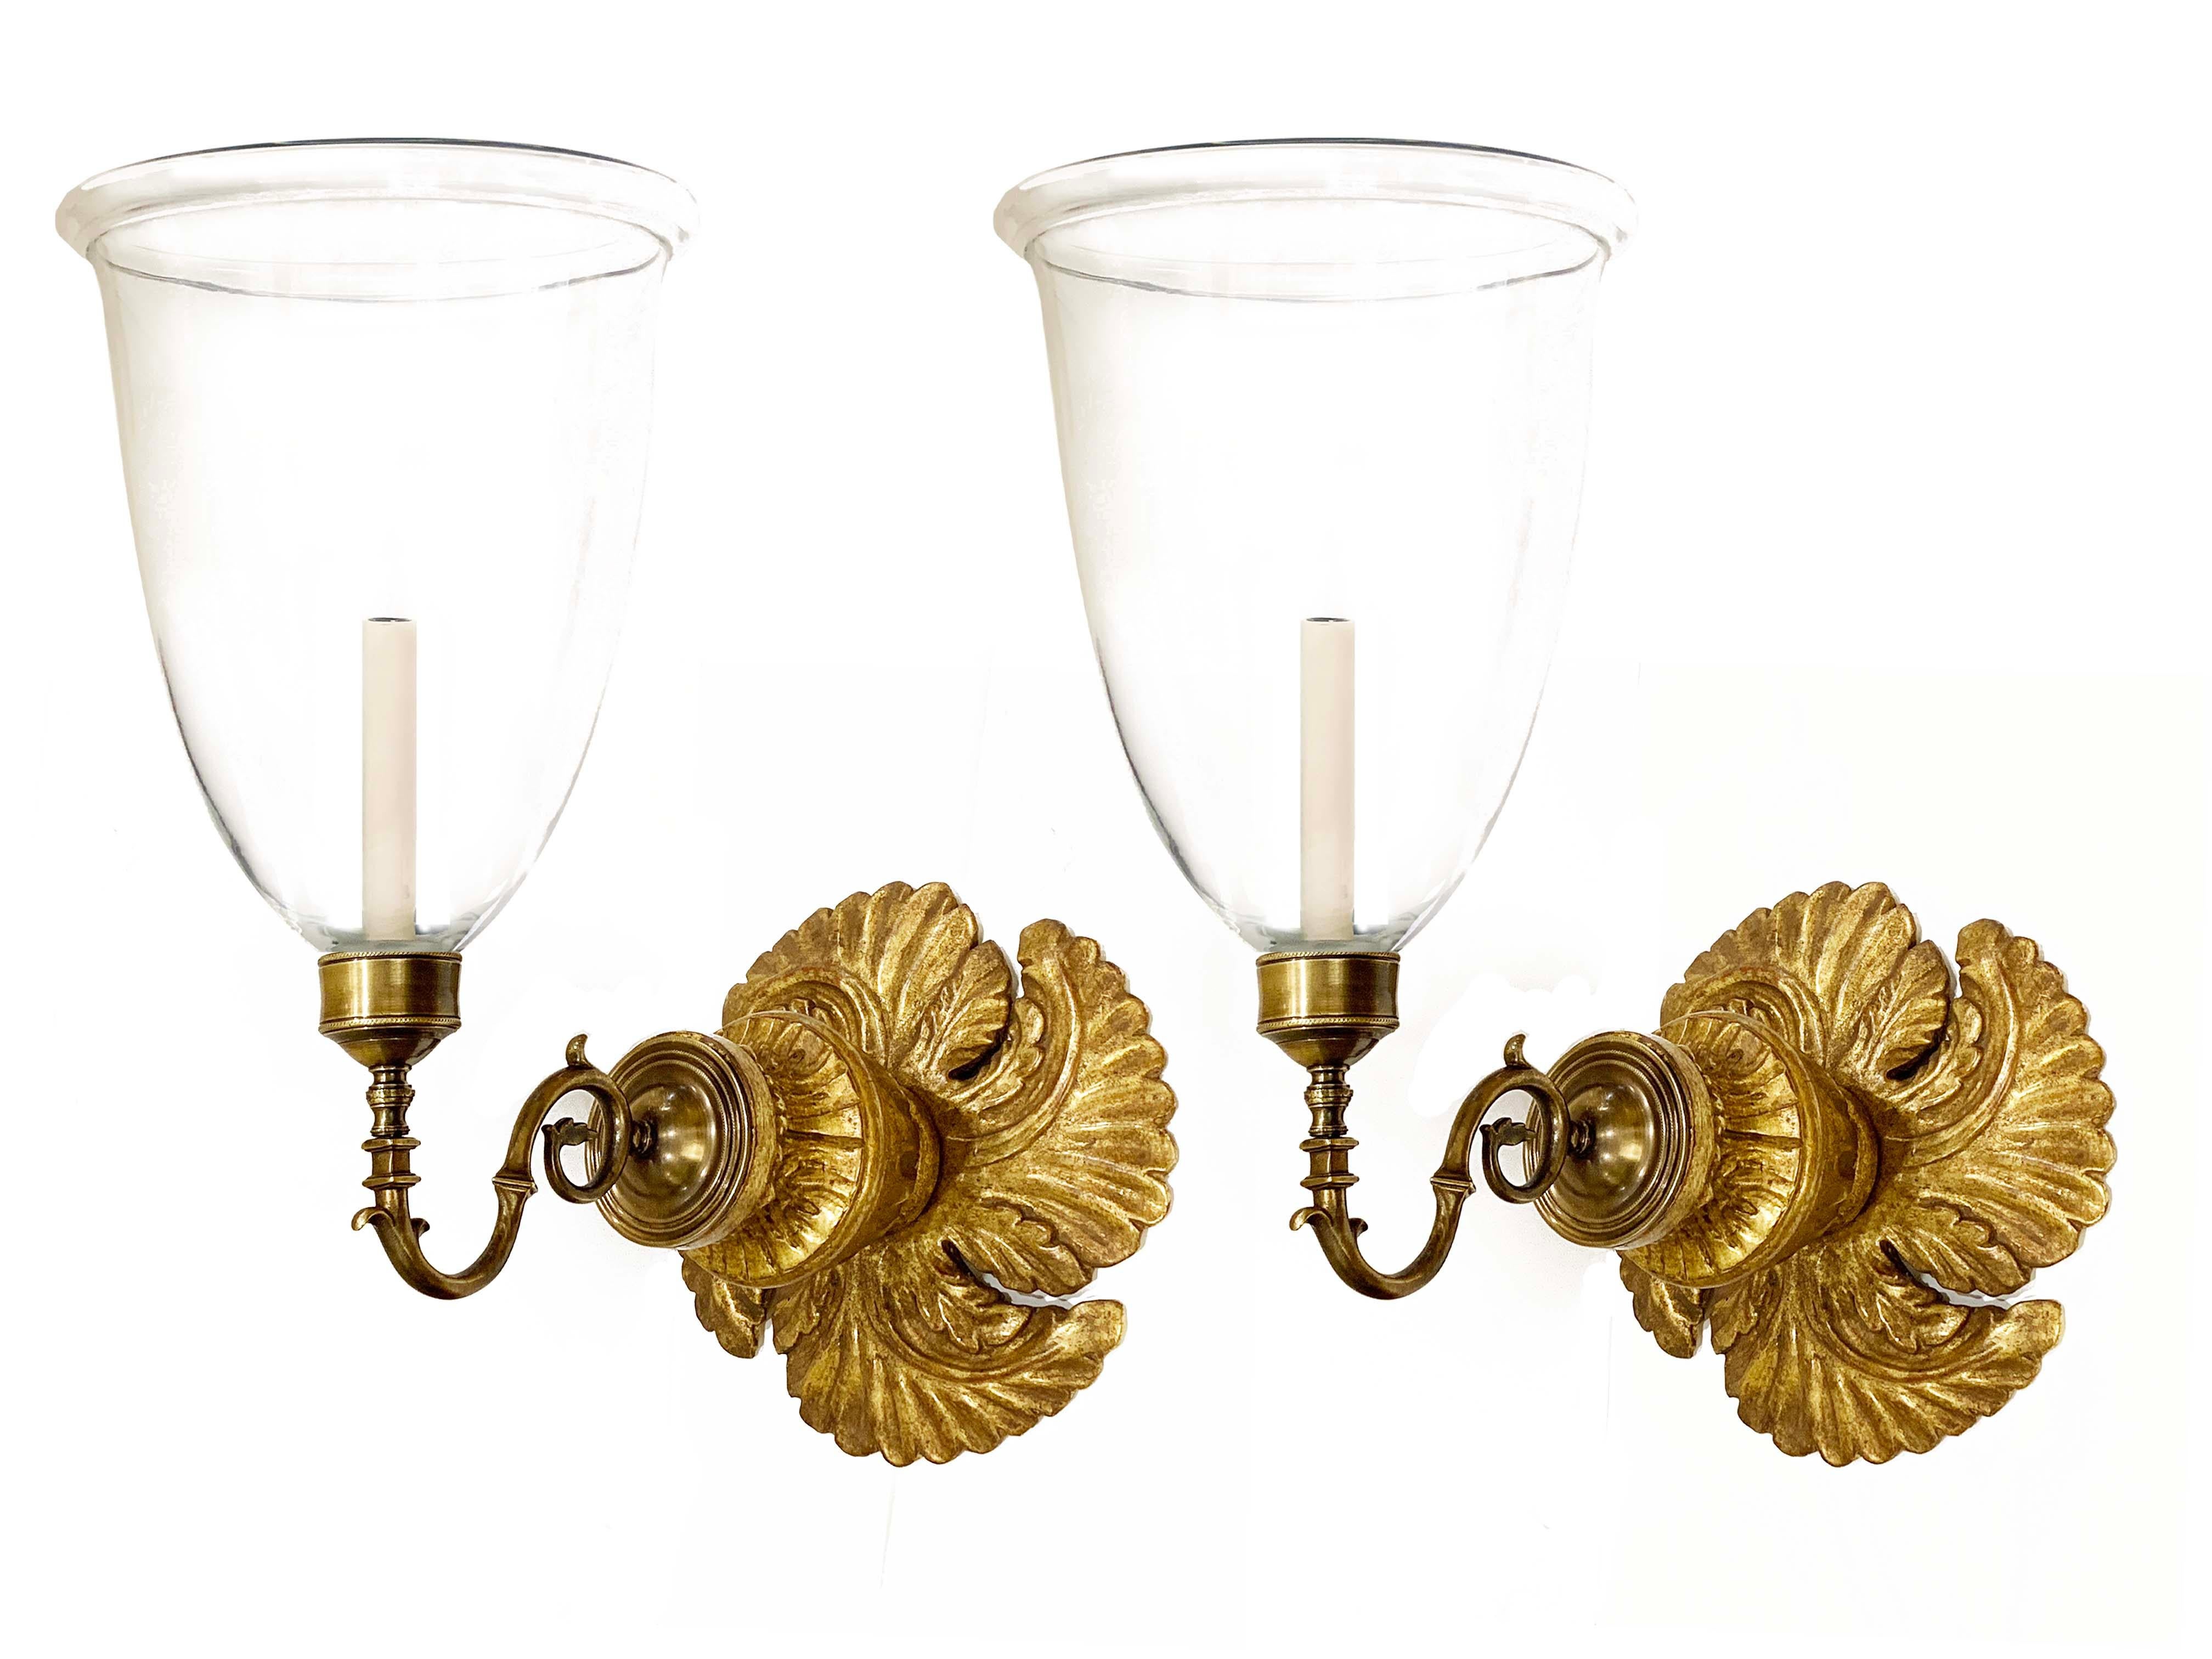 A pair of hand-carved gilt Georgian-style backplates with patinated brass sconce fittings and large hand-blown clear glass hurricane shades. Electrified with one candelabra base socket per sconce.

Our custom hurricane sconces are available with